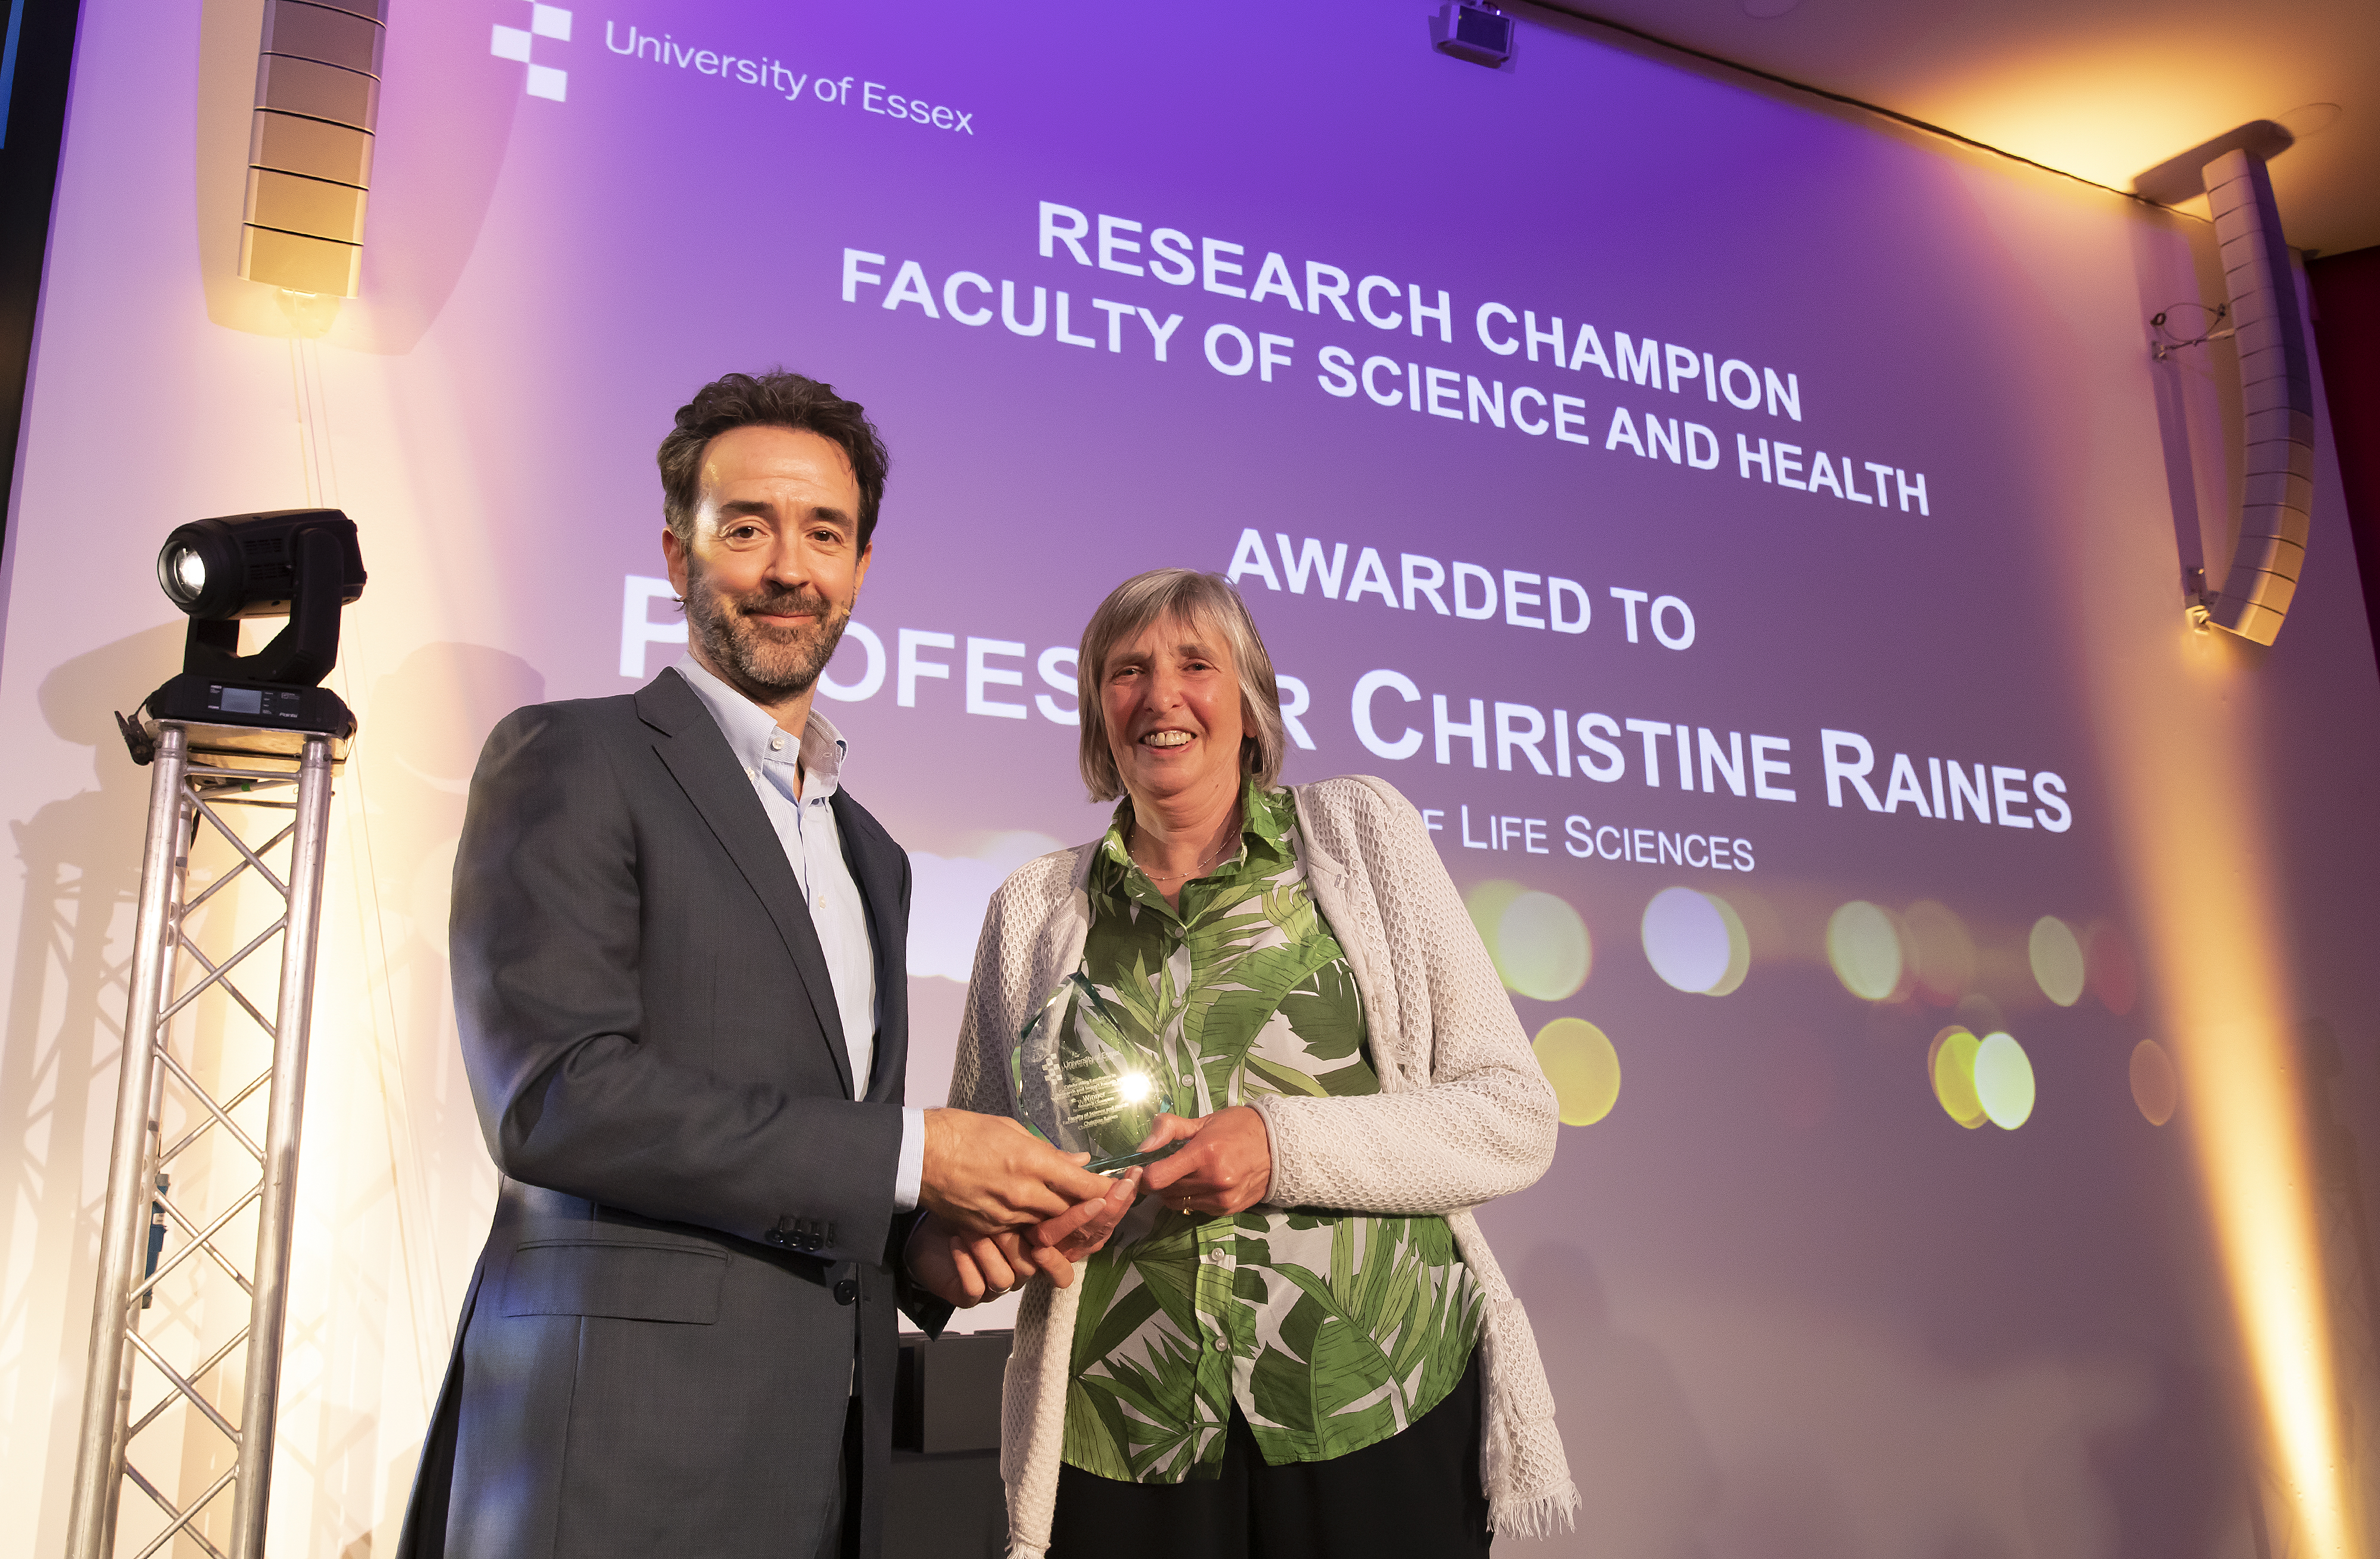 Christine Raines and Life Sciences Technical Team recognized at Essex’s Celebrating Excellence in Research and Impact Awards